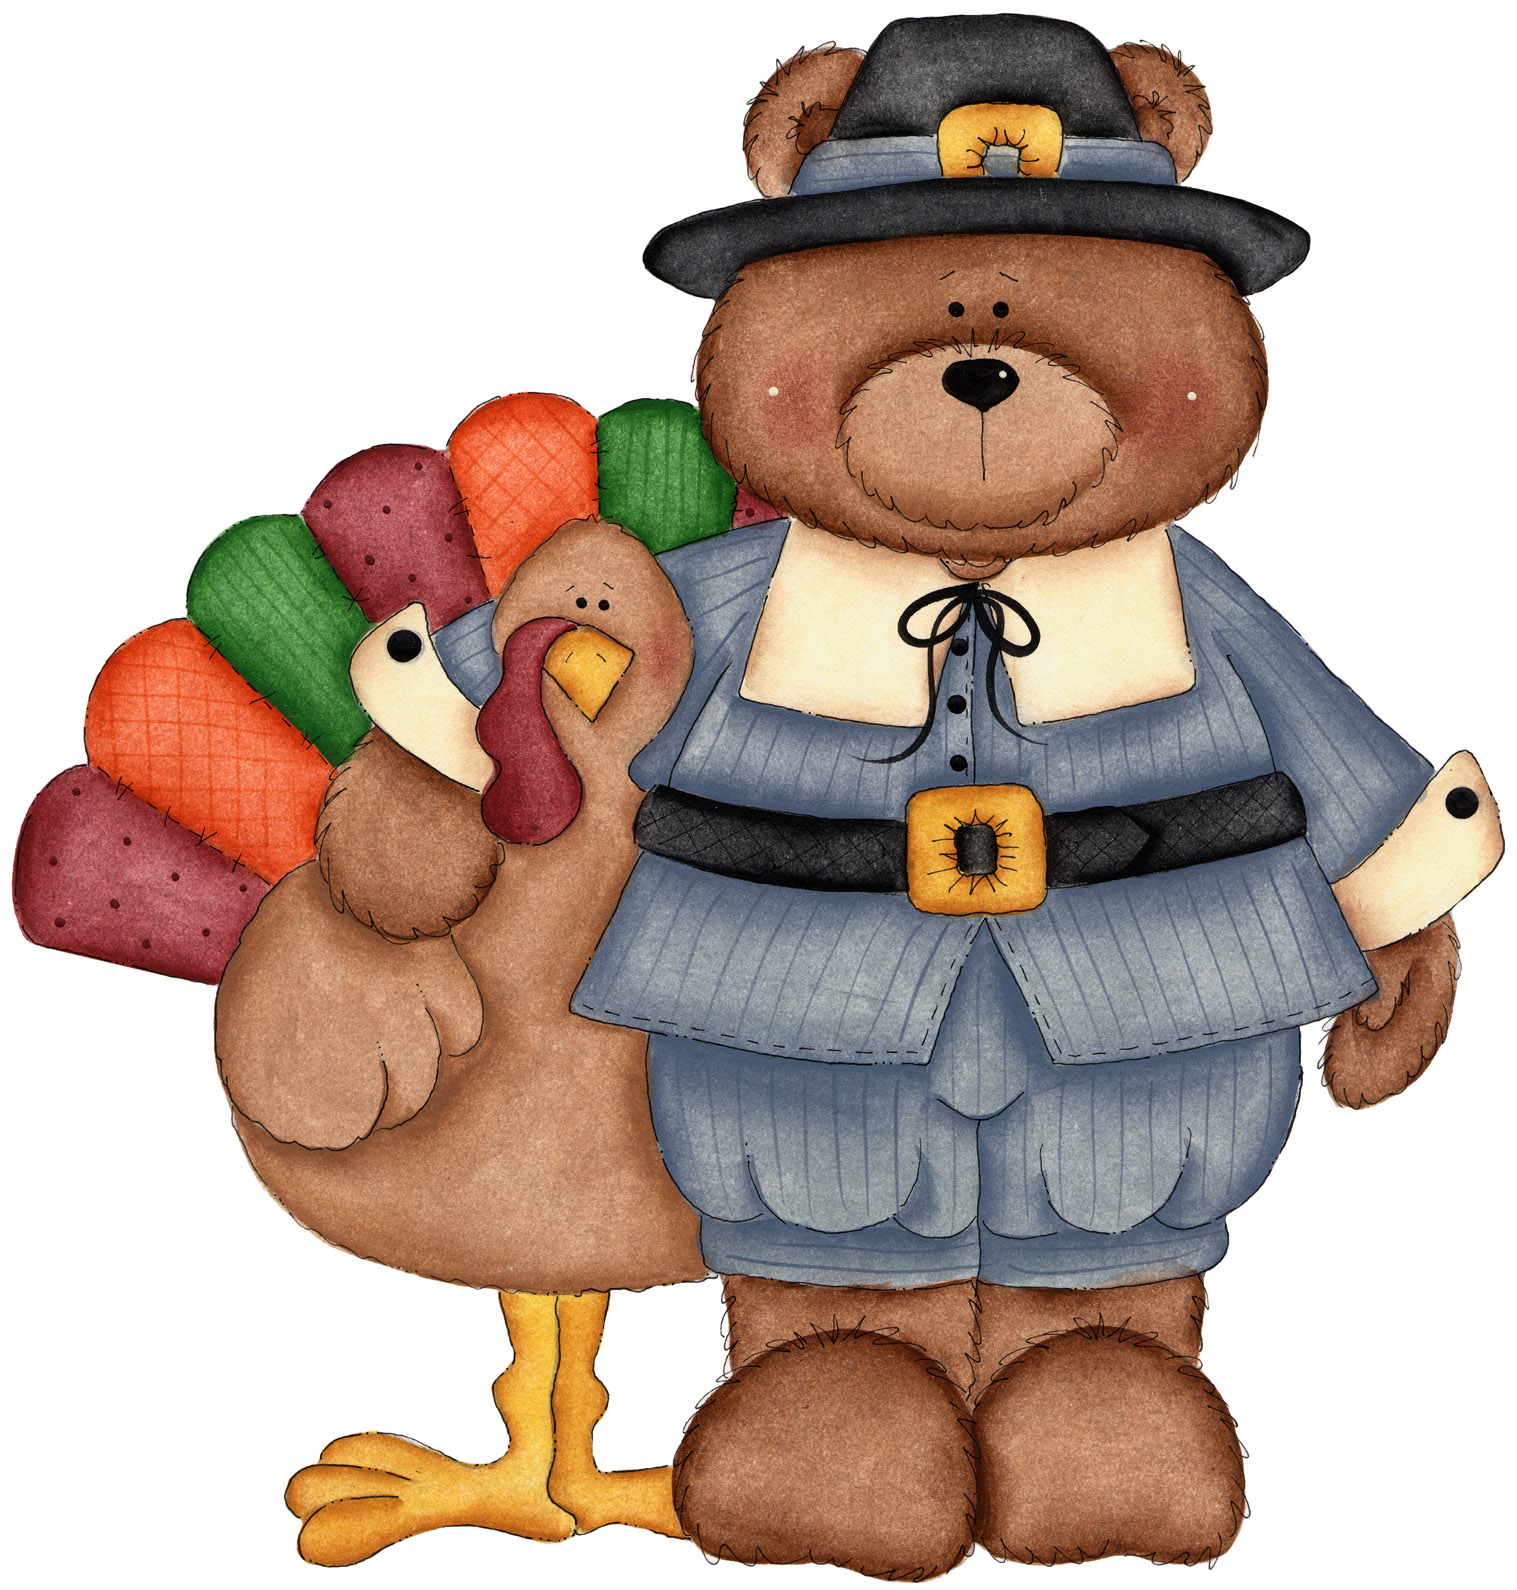 Animated Happy Thanksgiving Clip Art - ClipArt Best